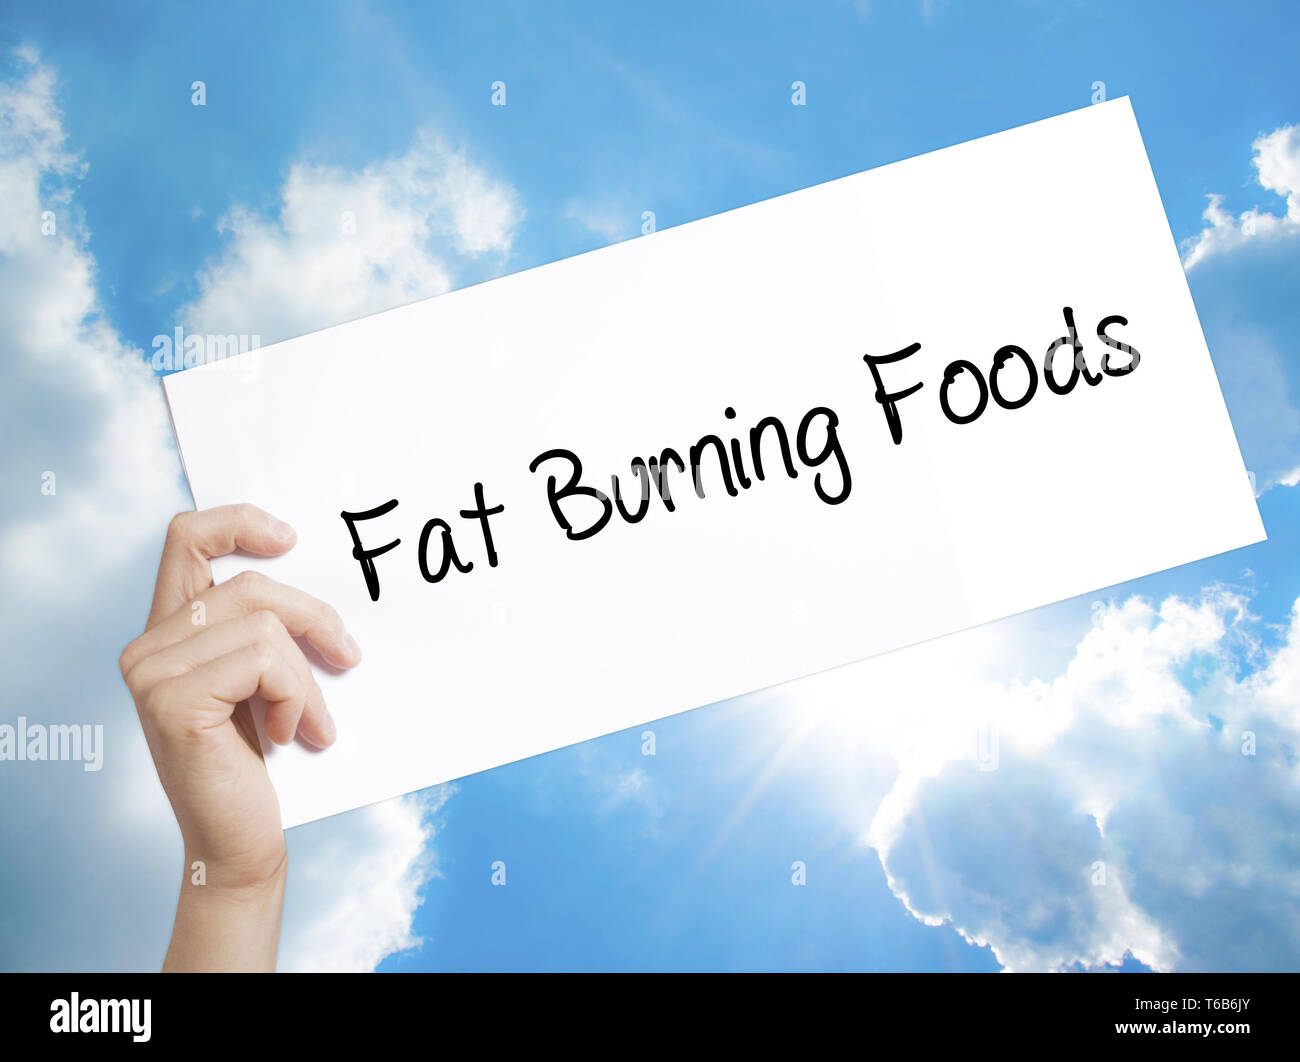 Fat Burning Foods Sign on white paper. Man Hand Holding Paper with text. Isolated on sky background Stock Photo